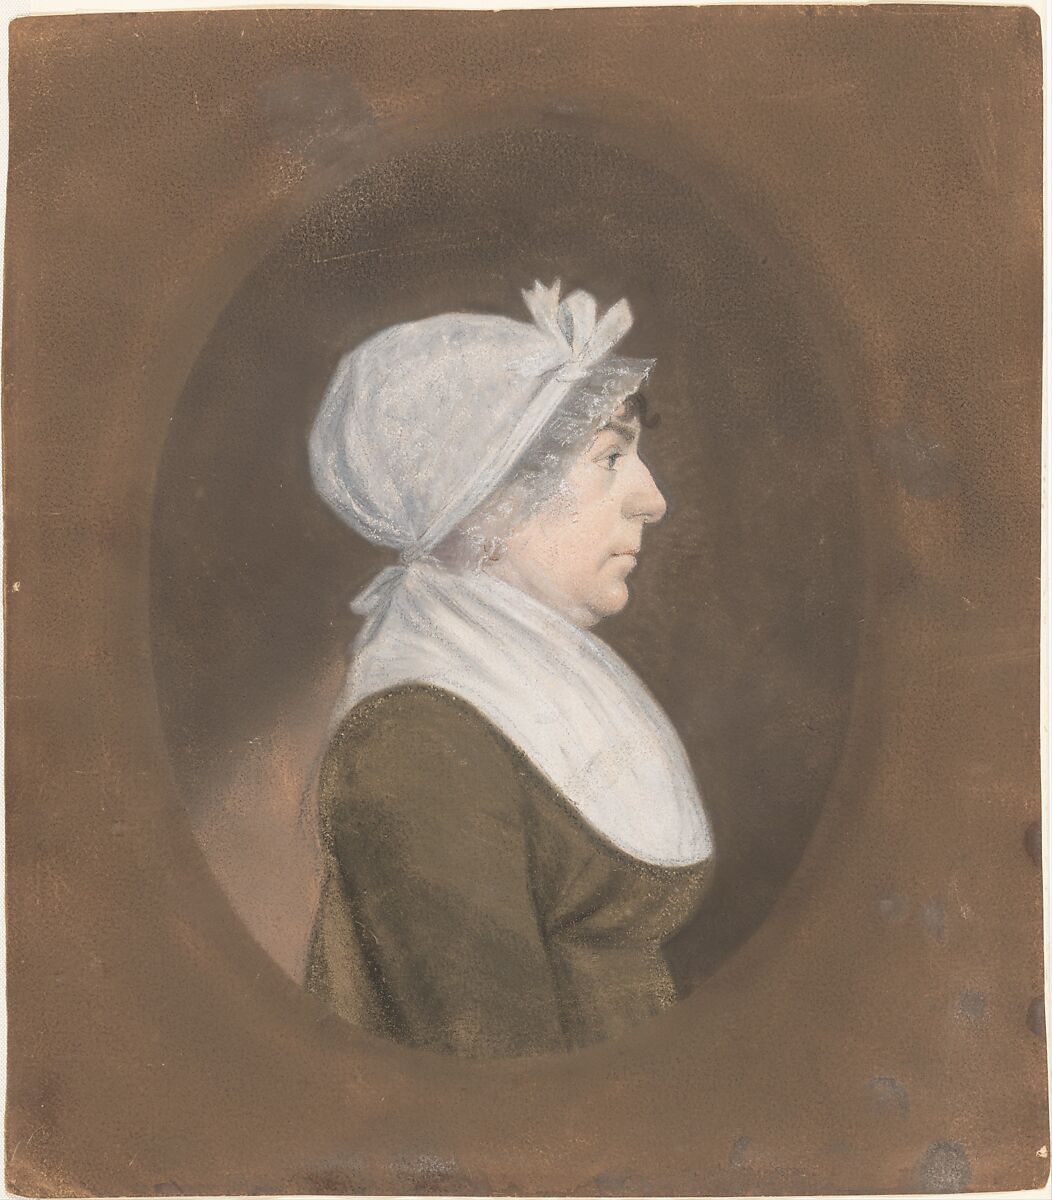 Dorothea Hart, Attributed to James Sharples (ca. 1751–1811), Pastel on tone (now oxidized) laid paper, American 